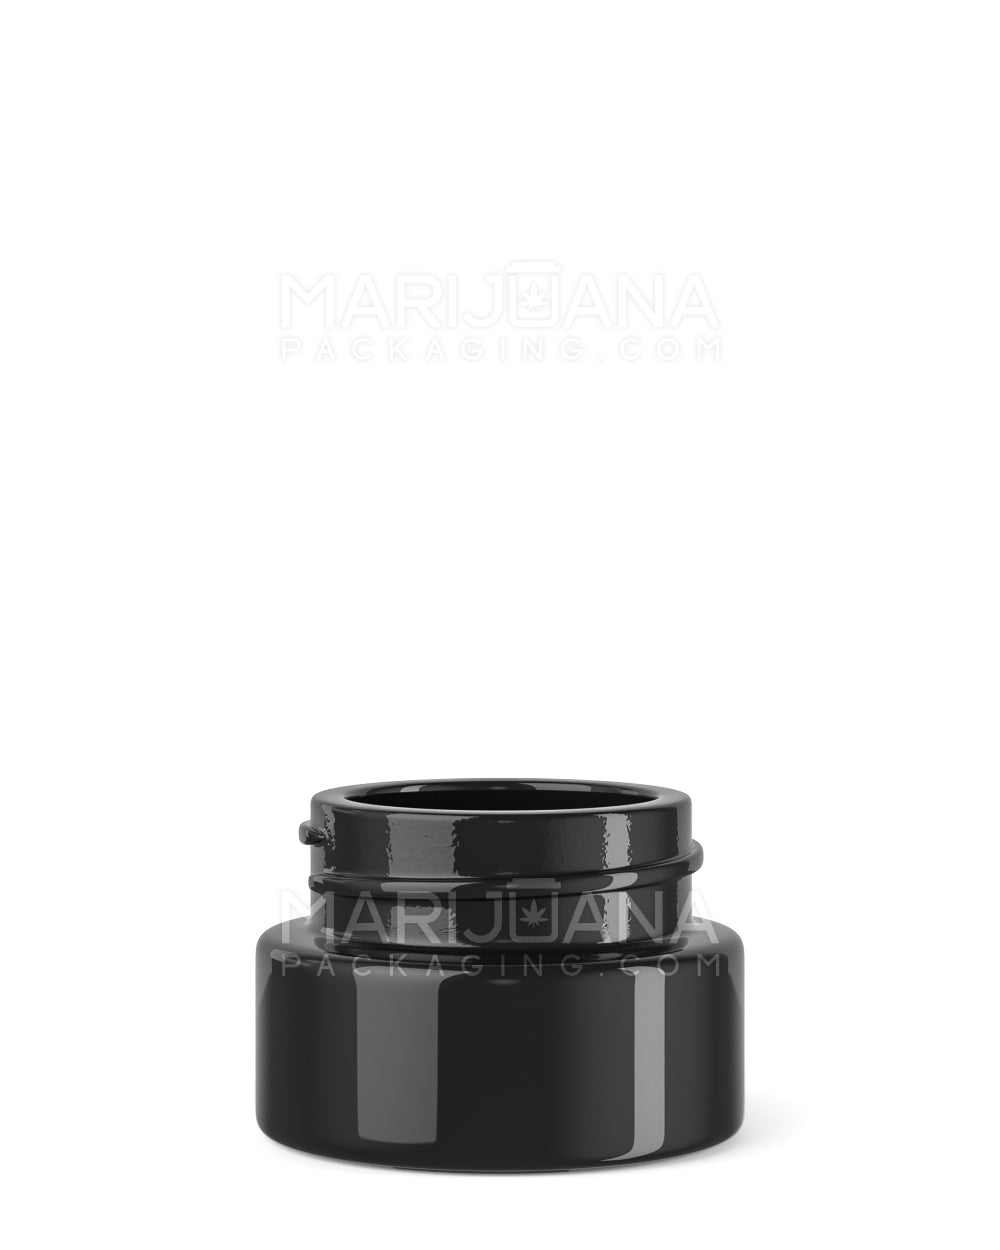 Child Resistant | Glossy Black Glass Concentrate Containers w/ Cap | 32mm - 9mL - 320 Count